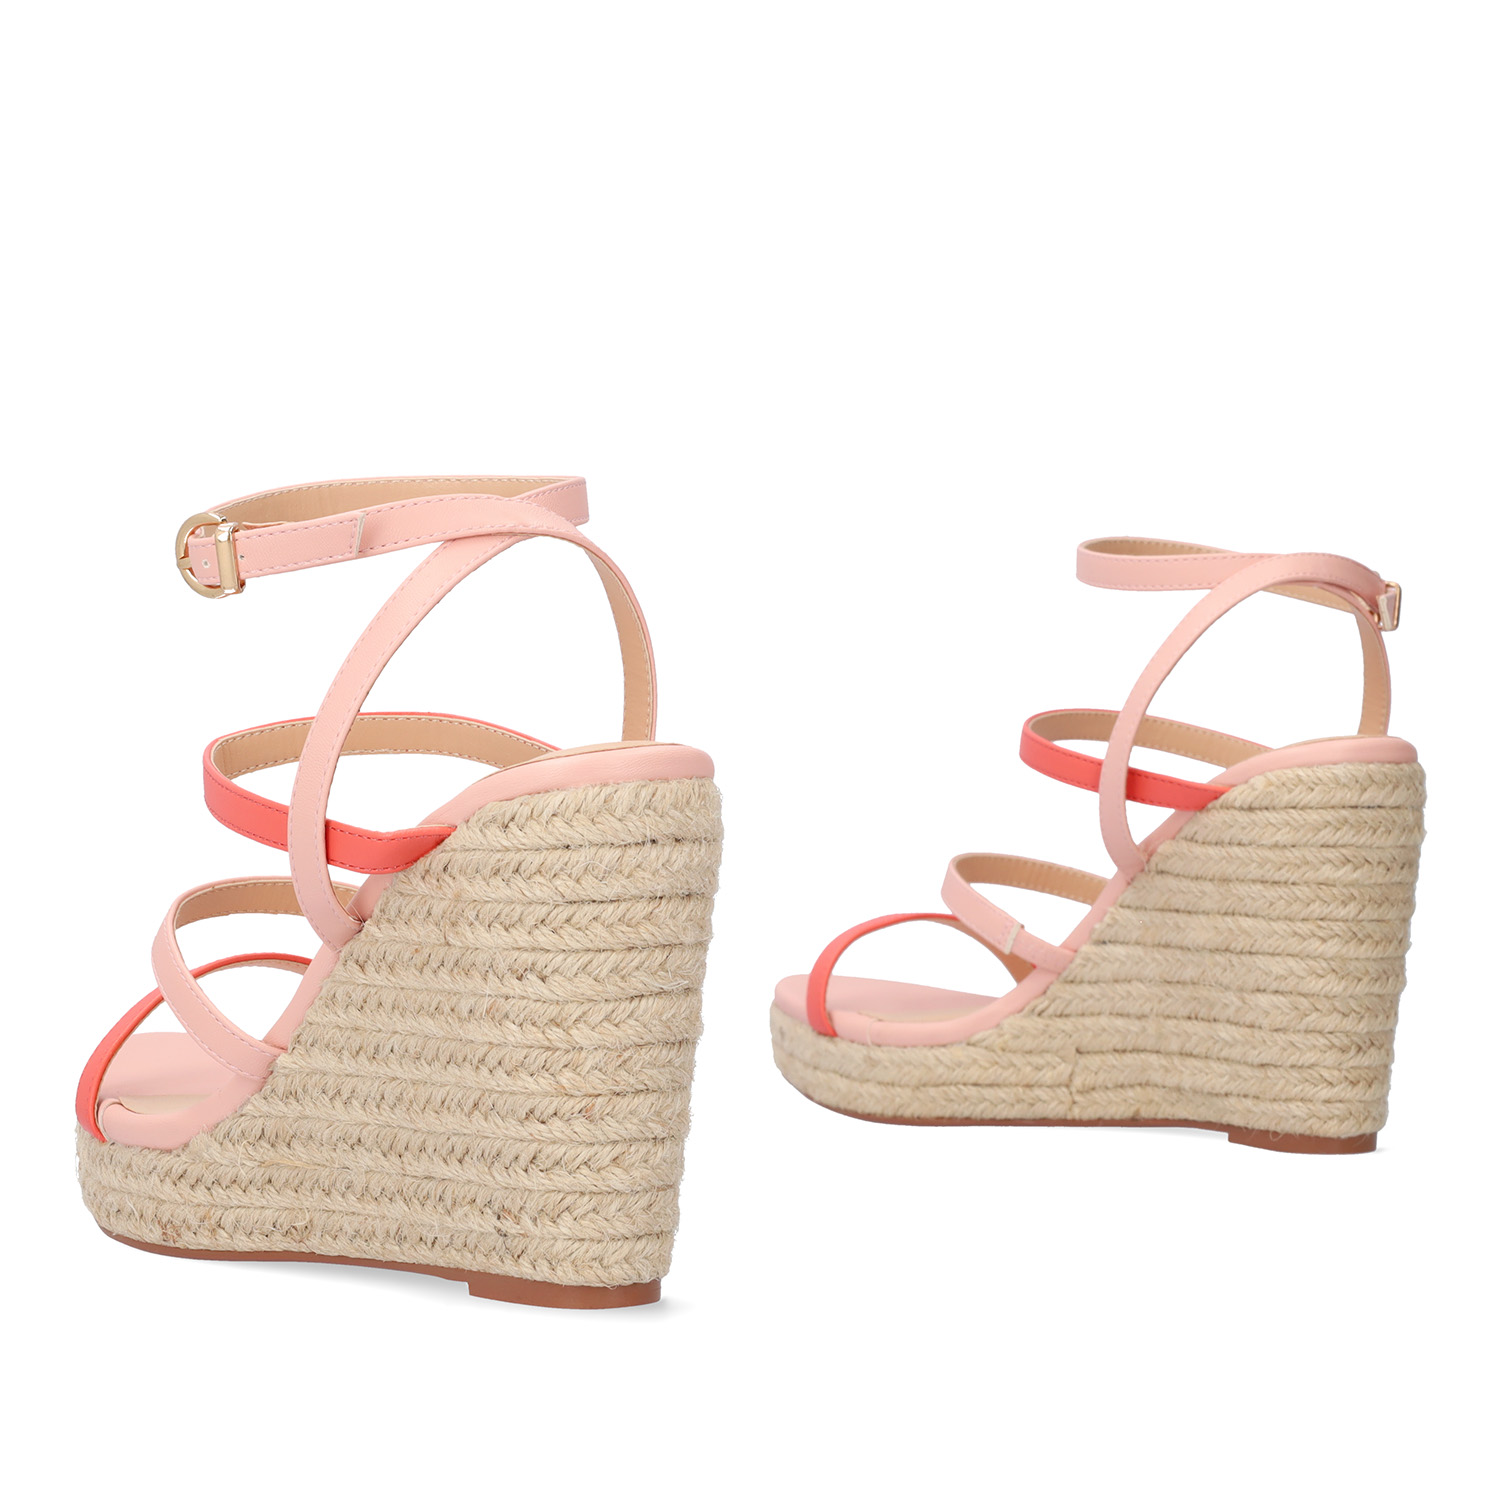 Salmon-colored soft fabric sandal with a jute wedge 